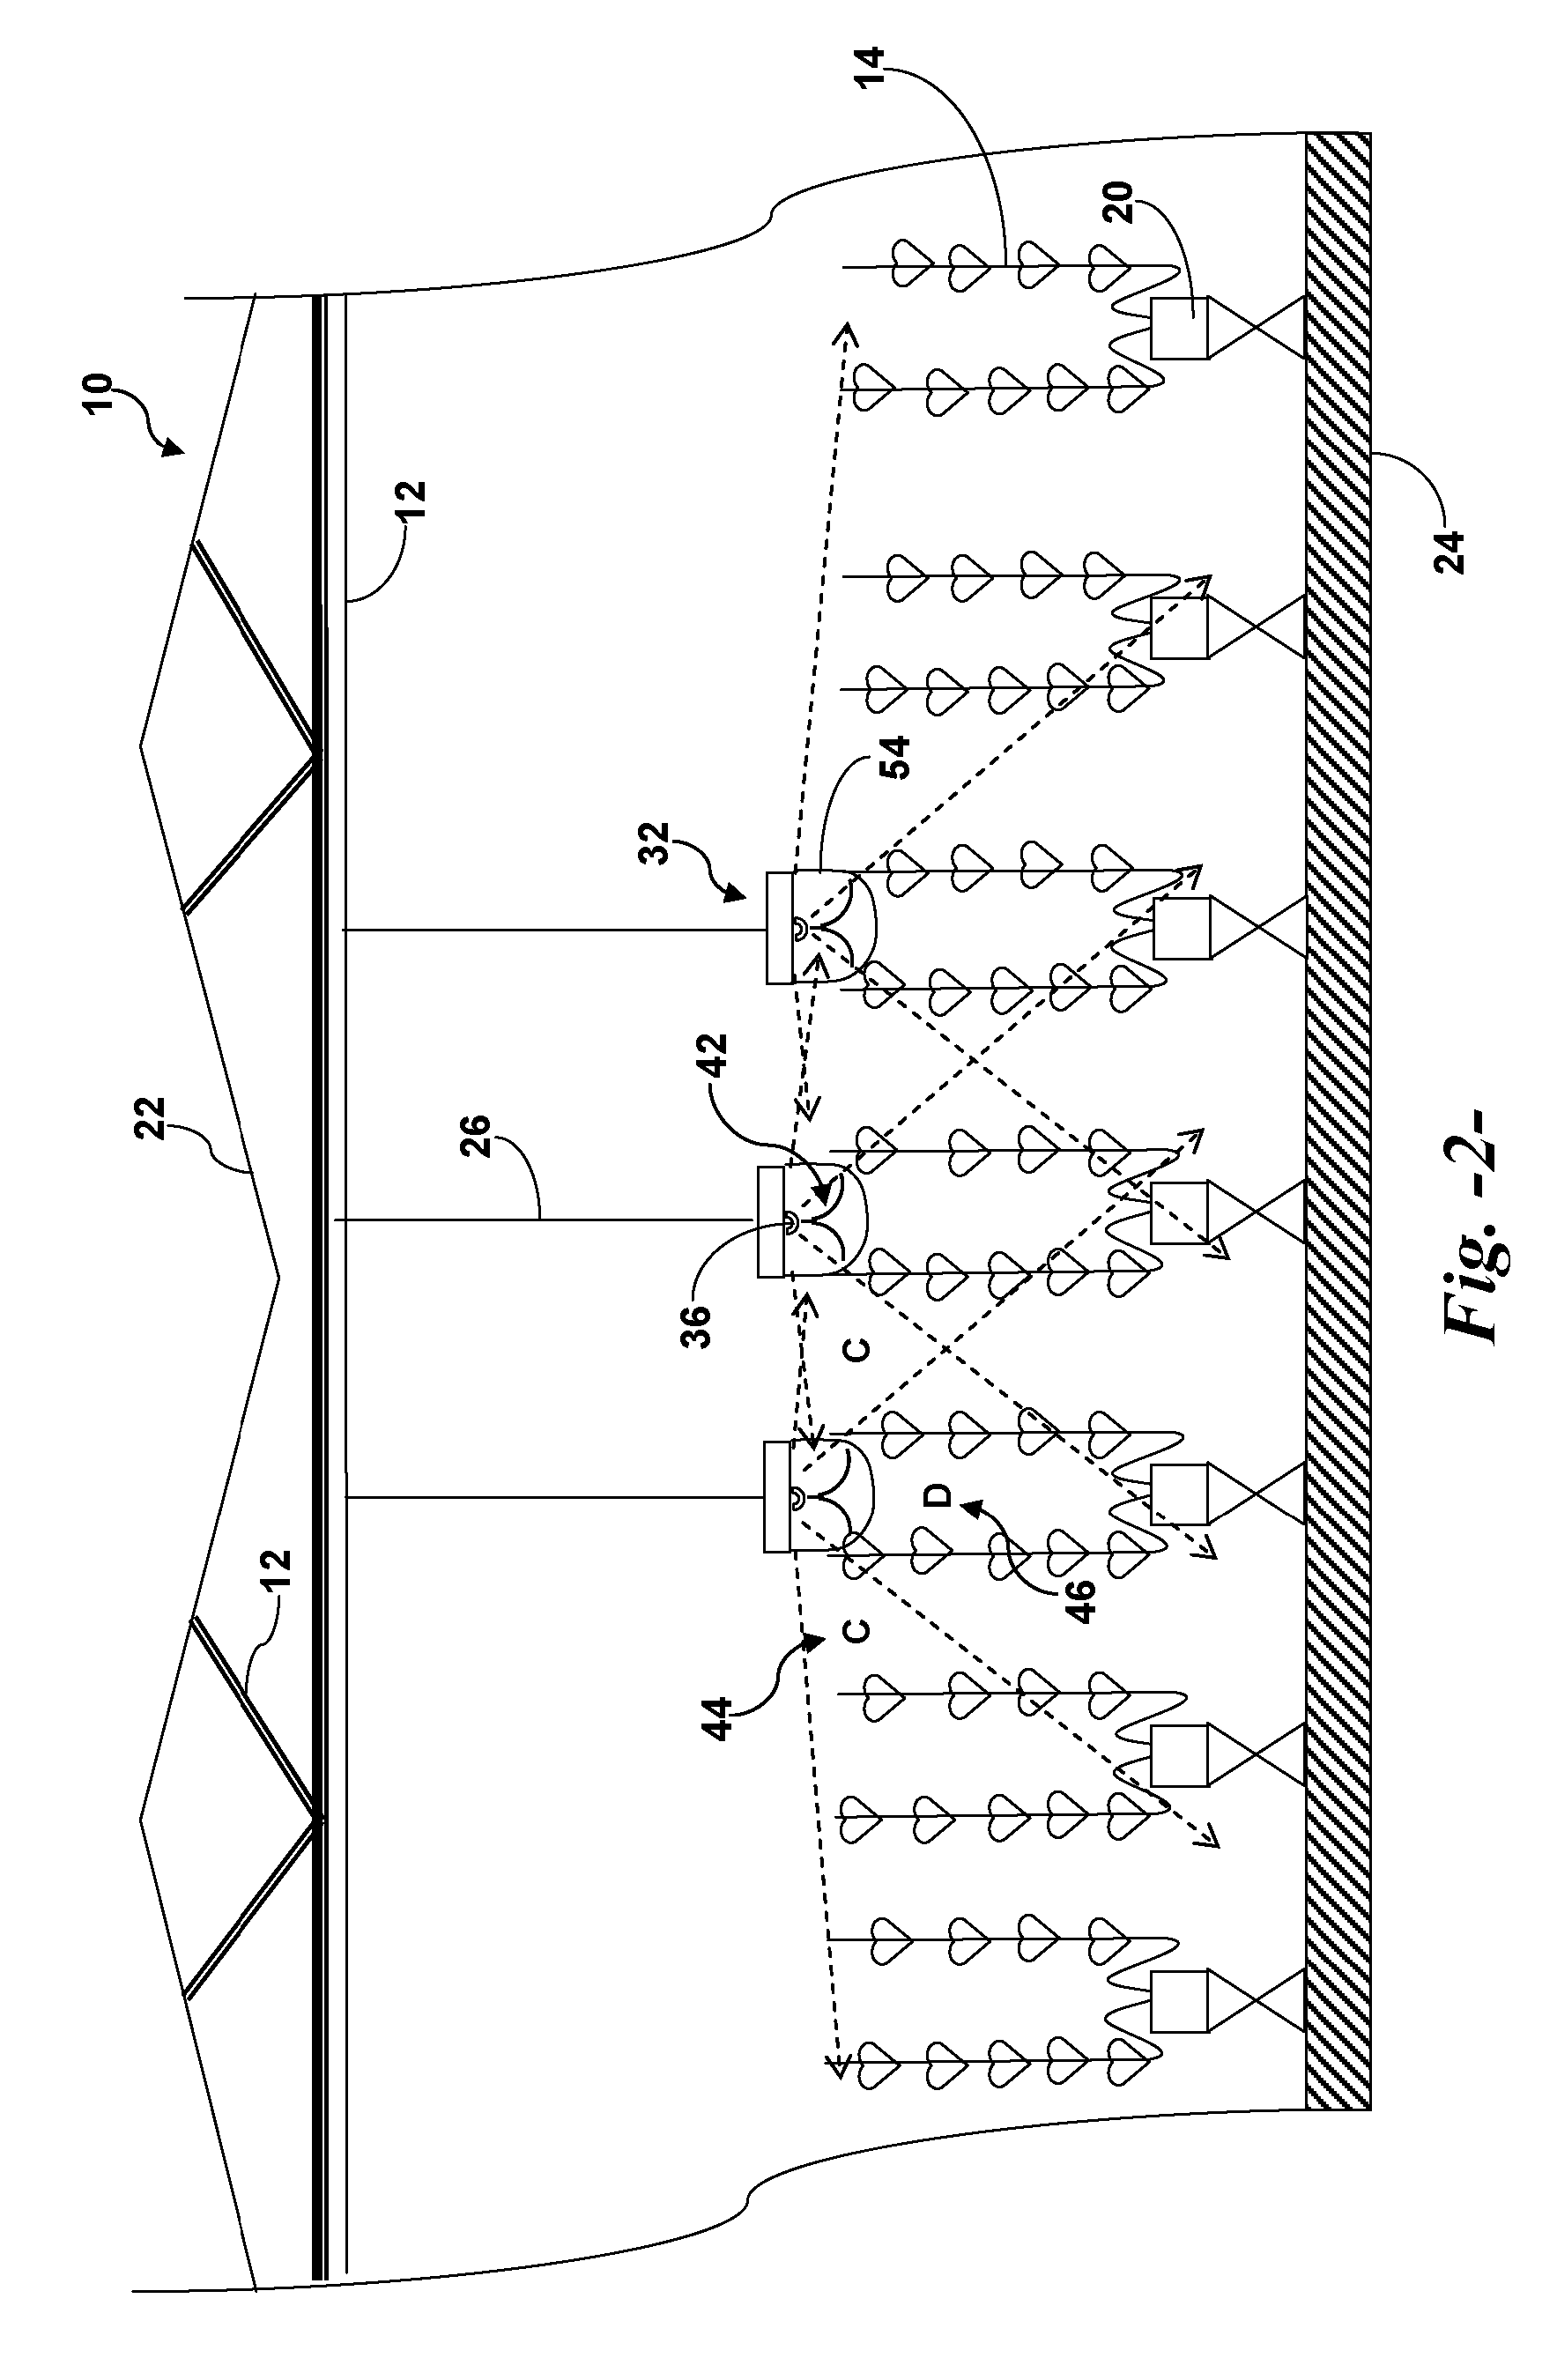 Light emitting diode (LED) light fixture for a greenhouse and a greenhouse incorporating a LED light fixture